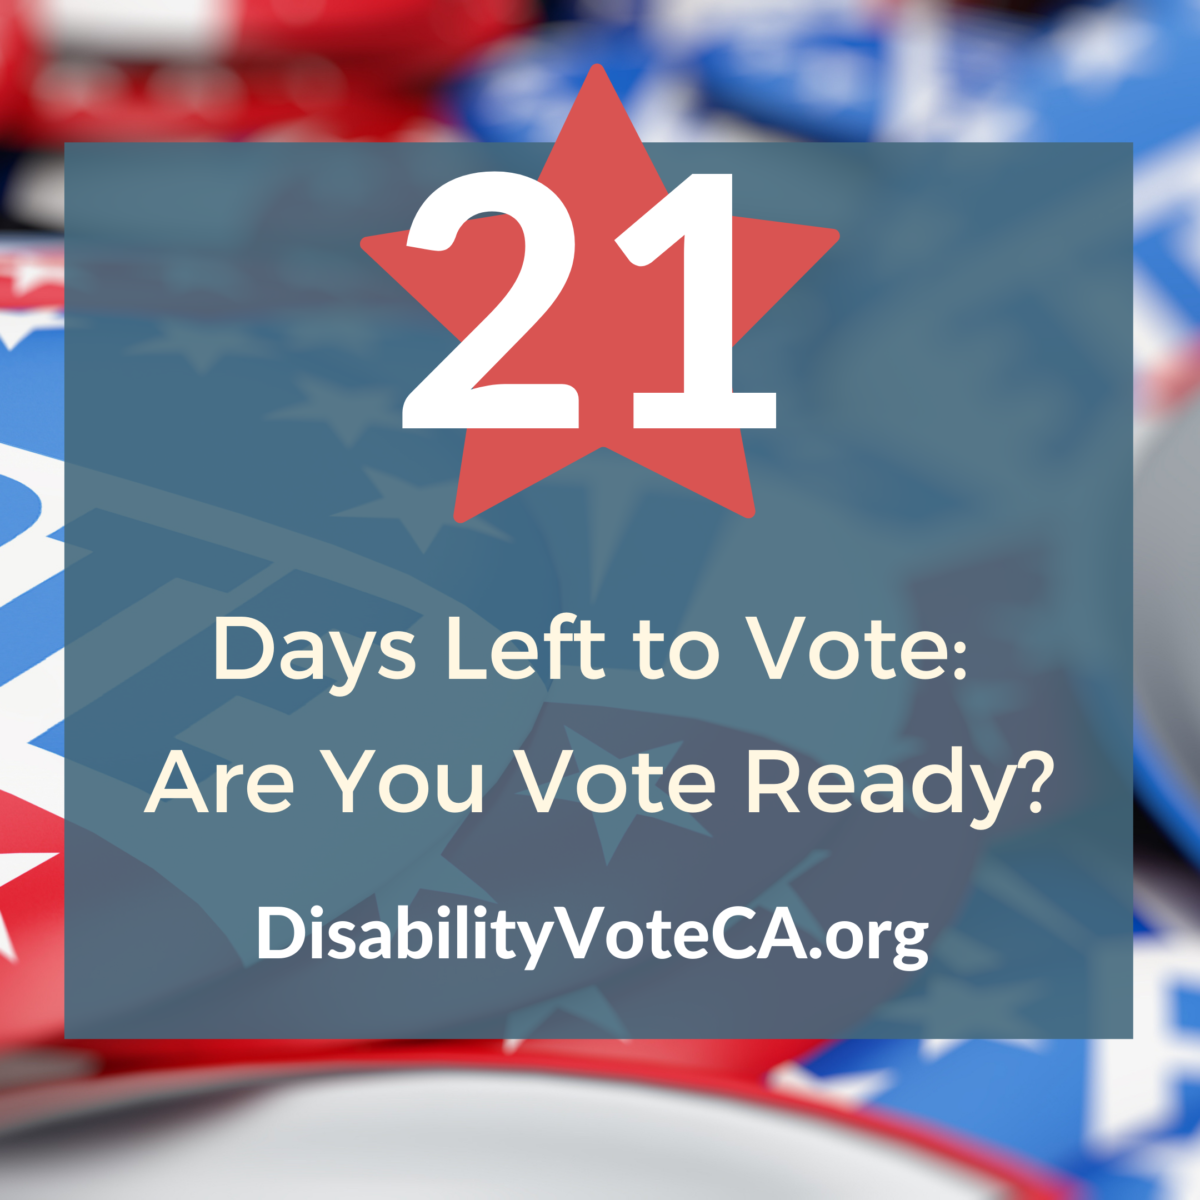 Signing Your Ballot Envelope When You Vote: What People with Disabilities Need to Know